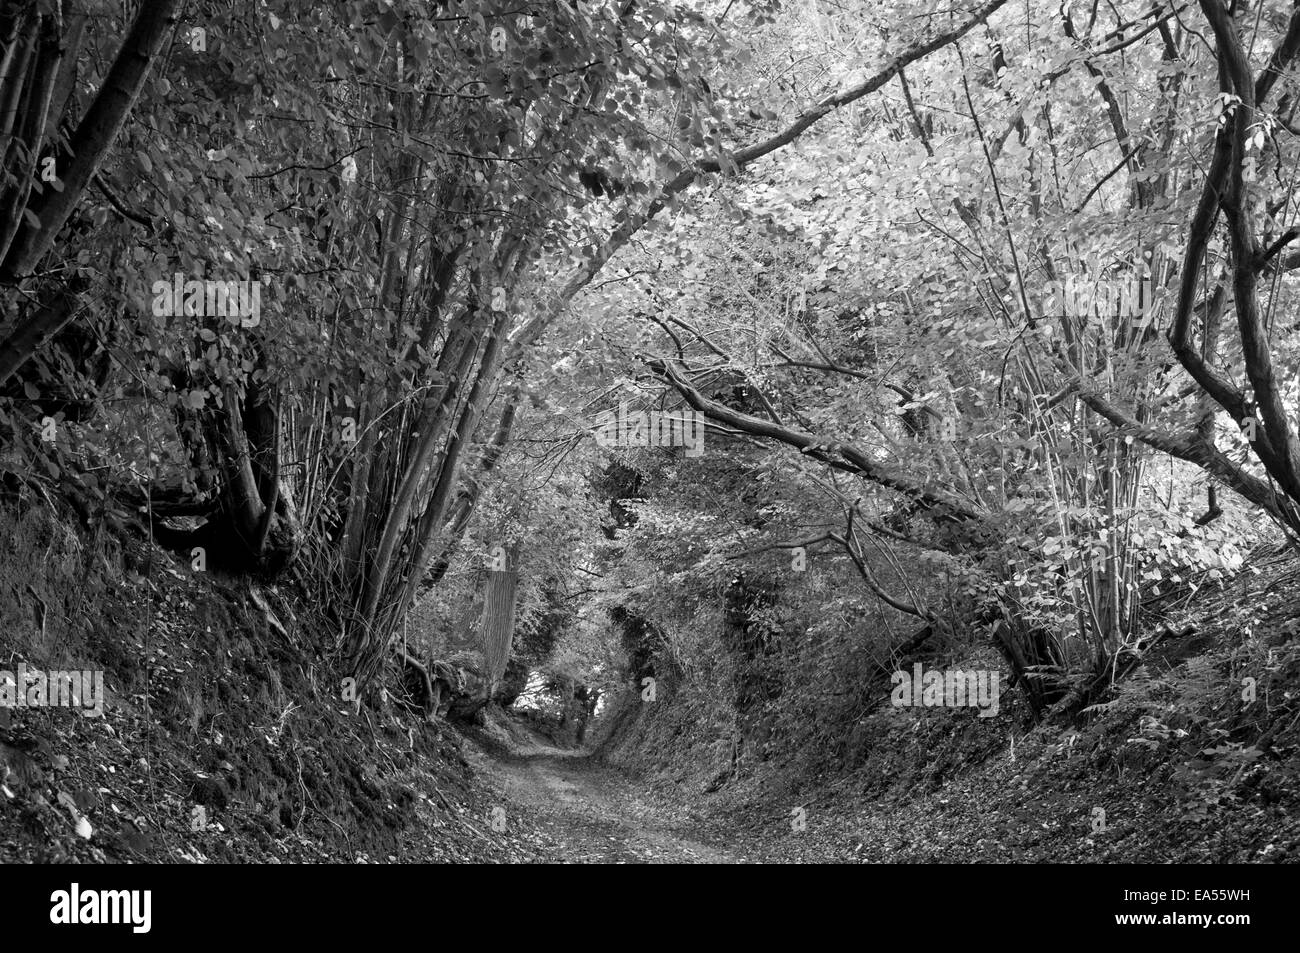 A black and white view of a sunken lane or bostal with almost total tree cover found close to  Pulborough, West Sussex Stock Photo